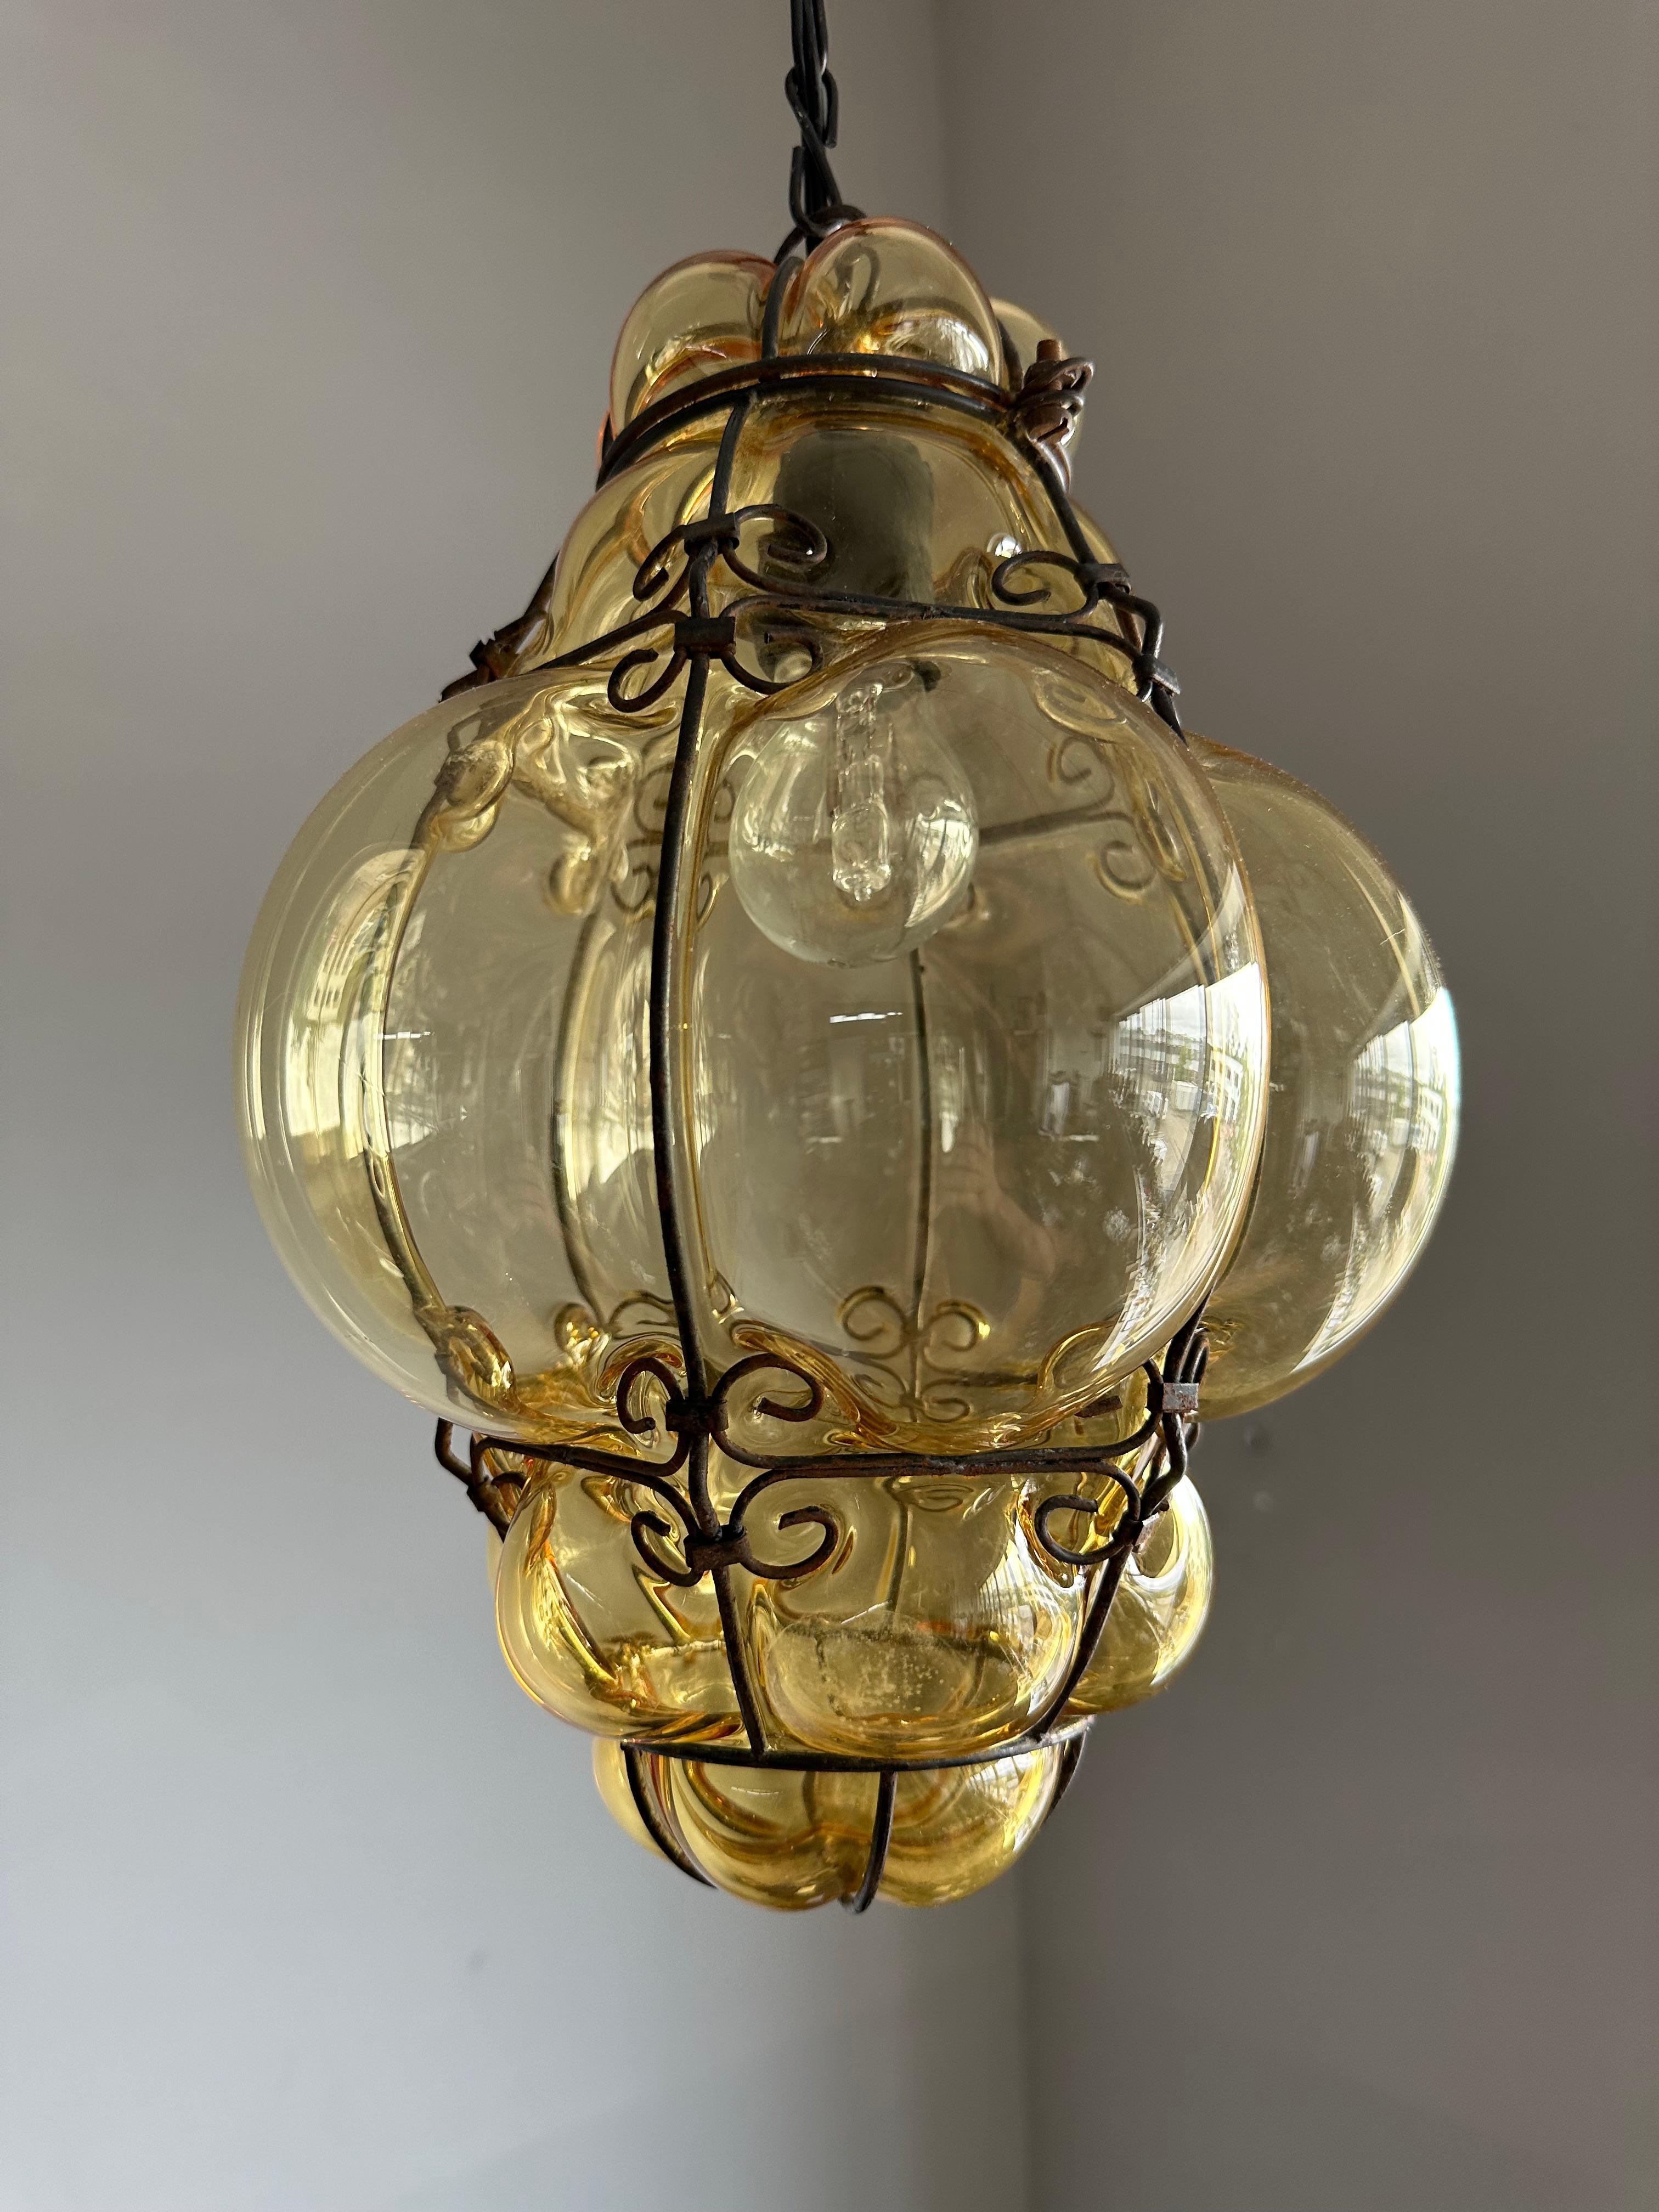 Beautiful Venetian light fixture for your hall, entrance, bedroom, cabin, etc

This good size, smokey amber glass pendant from midcentury Italy is another one of our recent finds. Handcrafted and mouthblown in one of the Venetian glass art studios